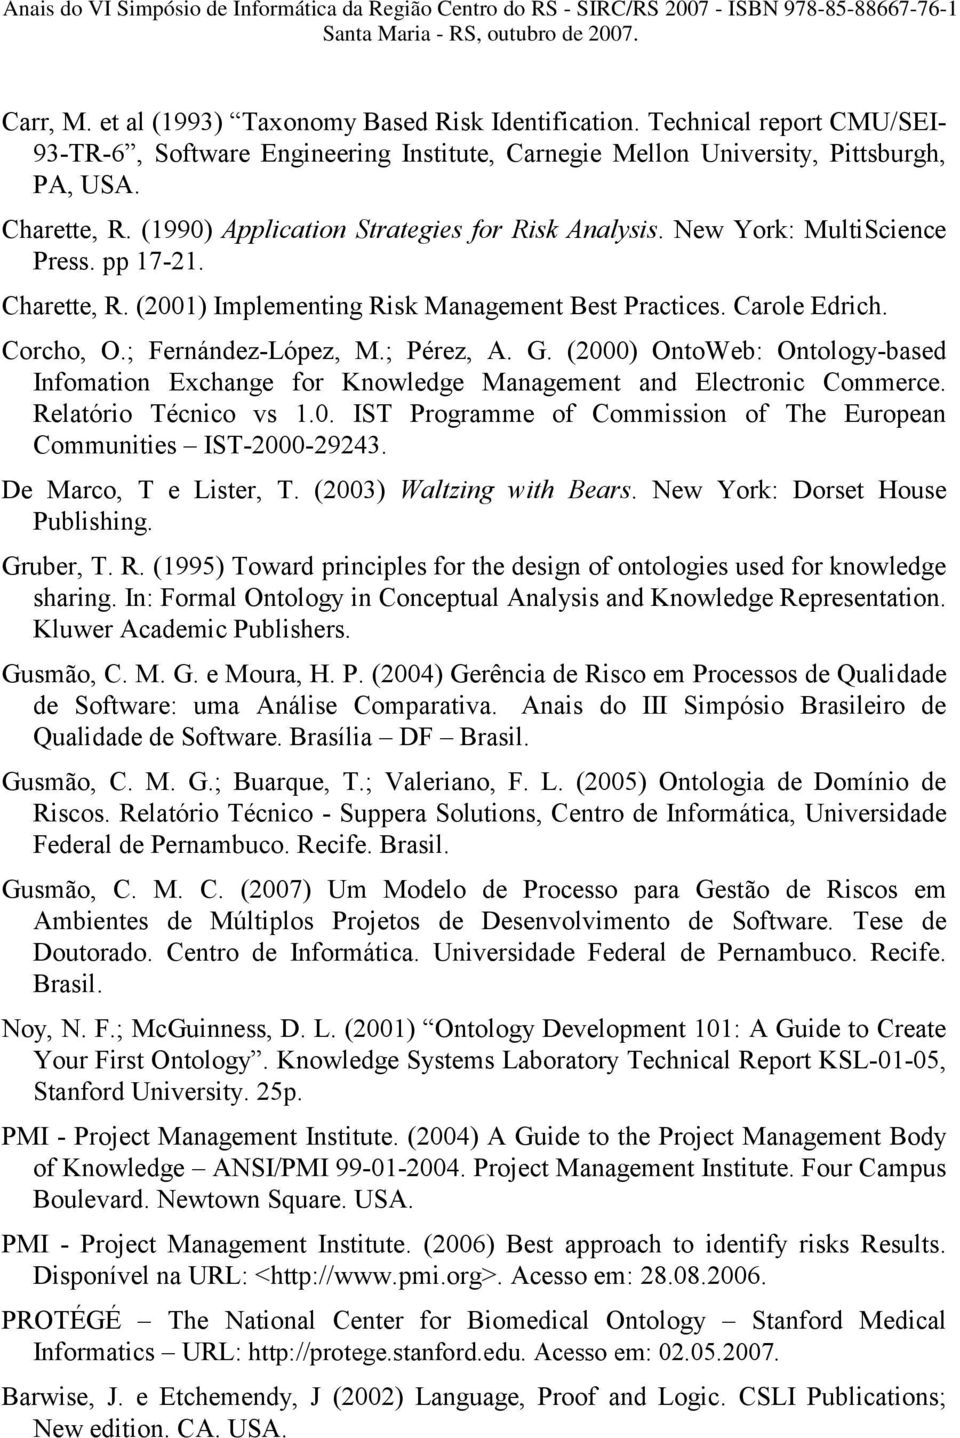 ; Pérez, A. G. (2000) OntoWeb: Ontology-based Infomation Exchange for Knowledge Management and Electronic Commerce. Relatório Técnico vs 1.0. IST Programme of Commission of The European Communities IST-2000-29243.